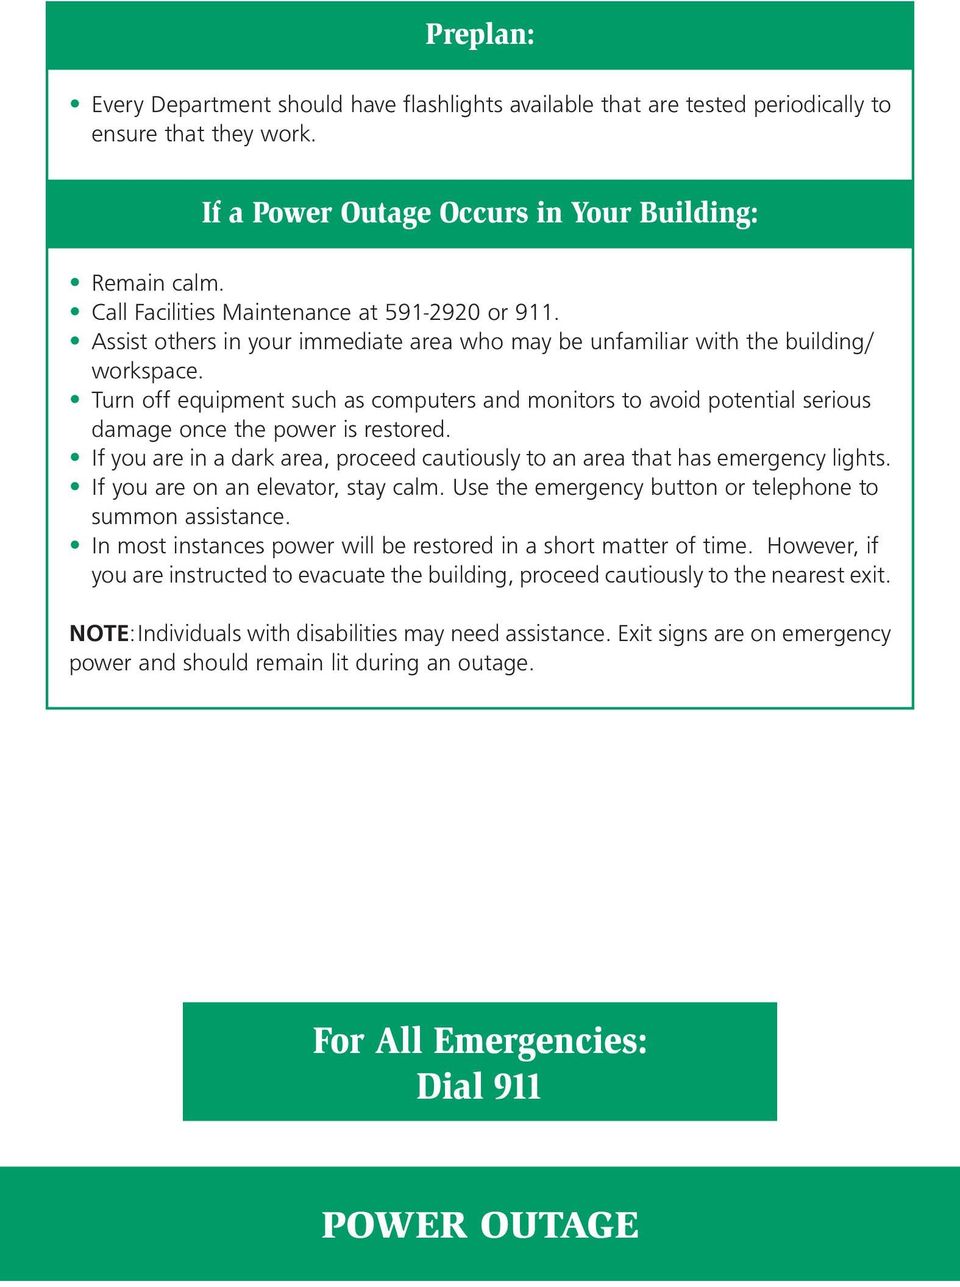 Turn off equipment such as computers and monitors to avoid potential serious damage once the power is restored. If you are in a dark area, proceed cautiously to an area that has emergency lights.